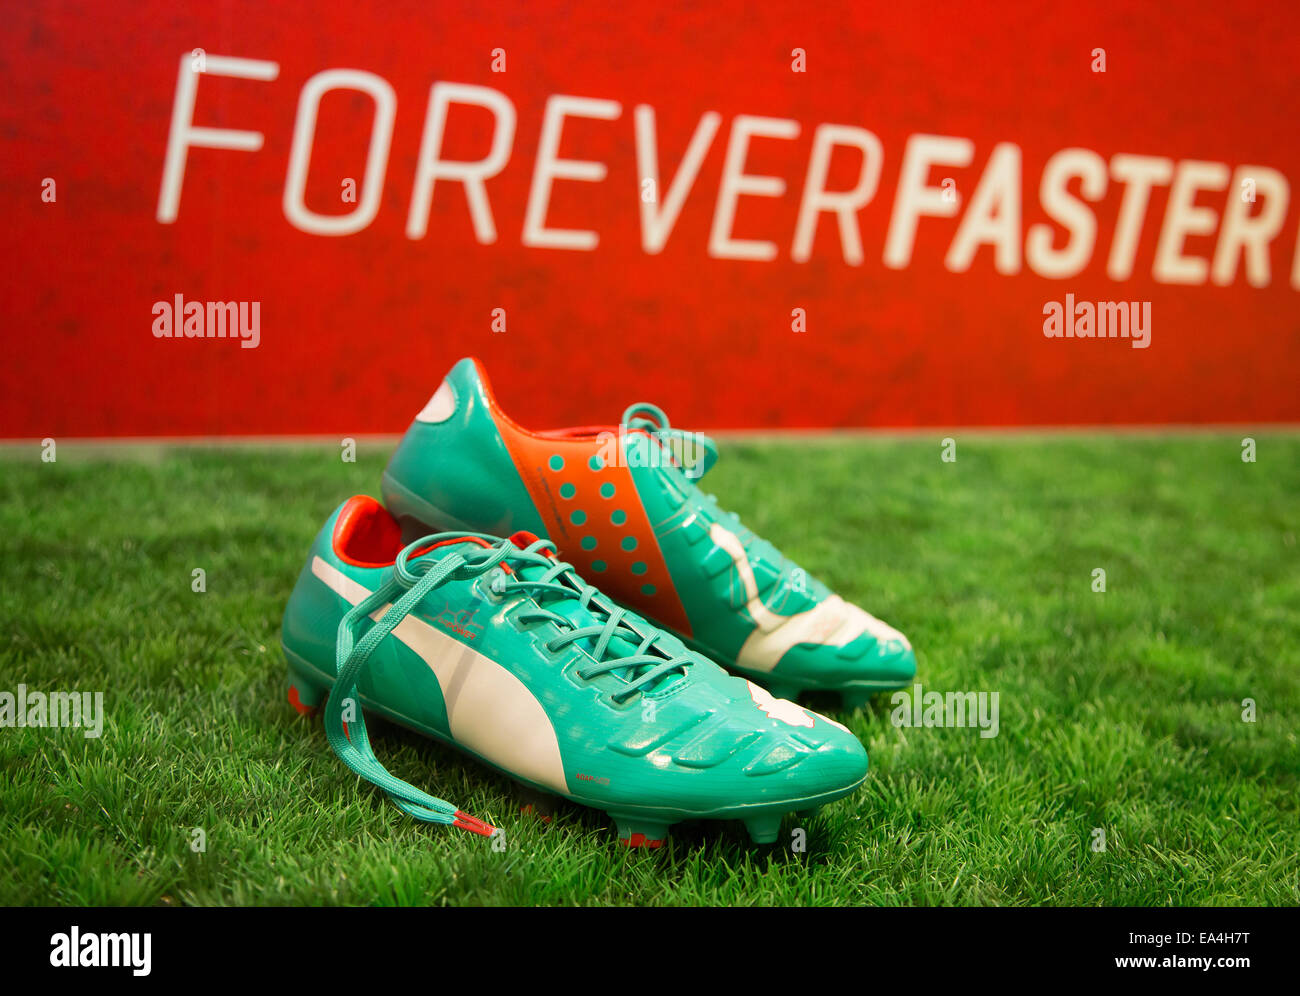 PUMA football boots evoPOWER lying on the grass with Forever Faster slogan  in the background. COMMERCIAL HANDOUT/EDITORIAL USE ONLY/NO SALES. Please  quote the source: "photo: PUMA/Ralf Roedel Stock Photo - Alamy